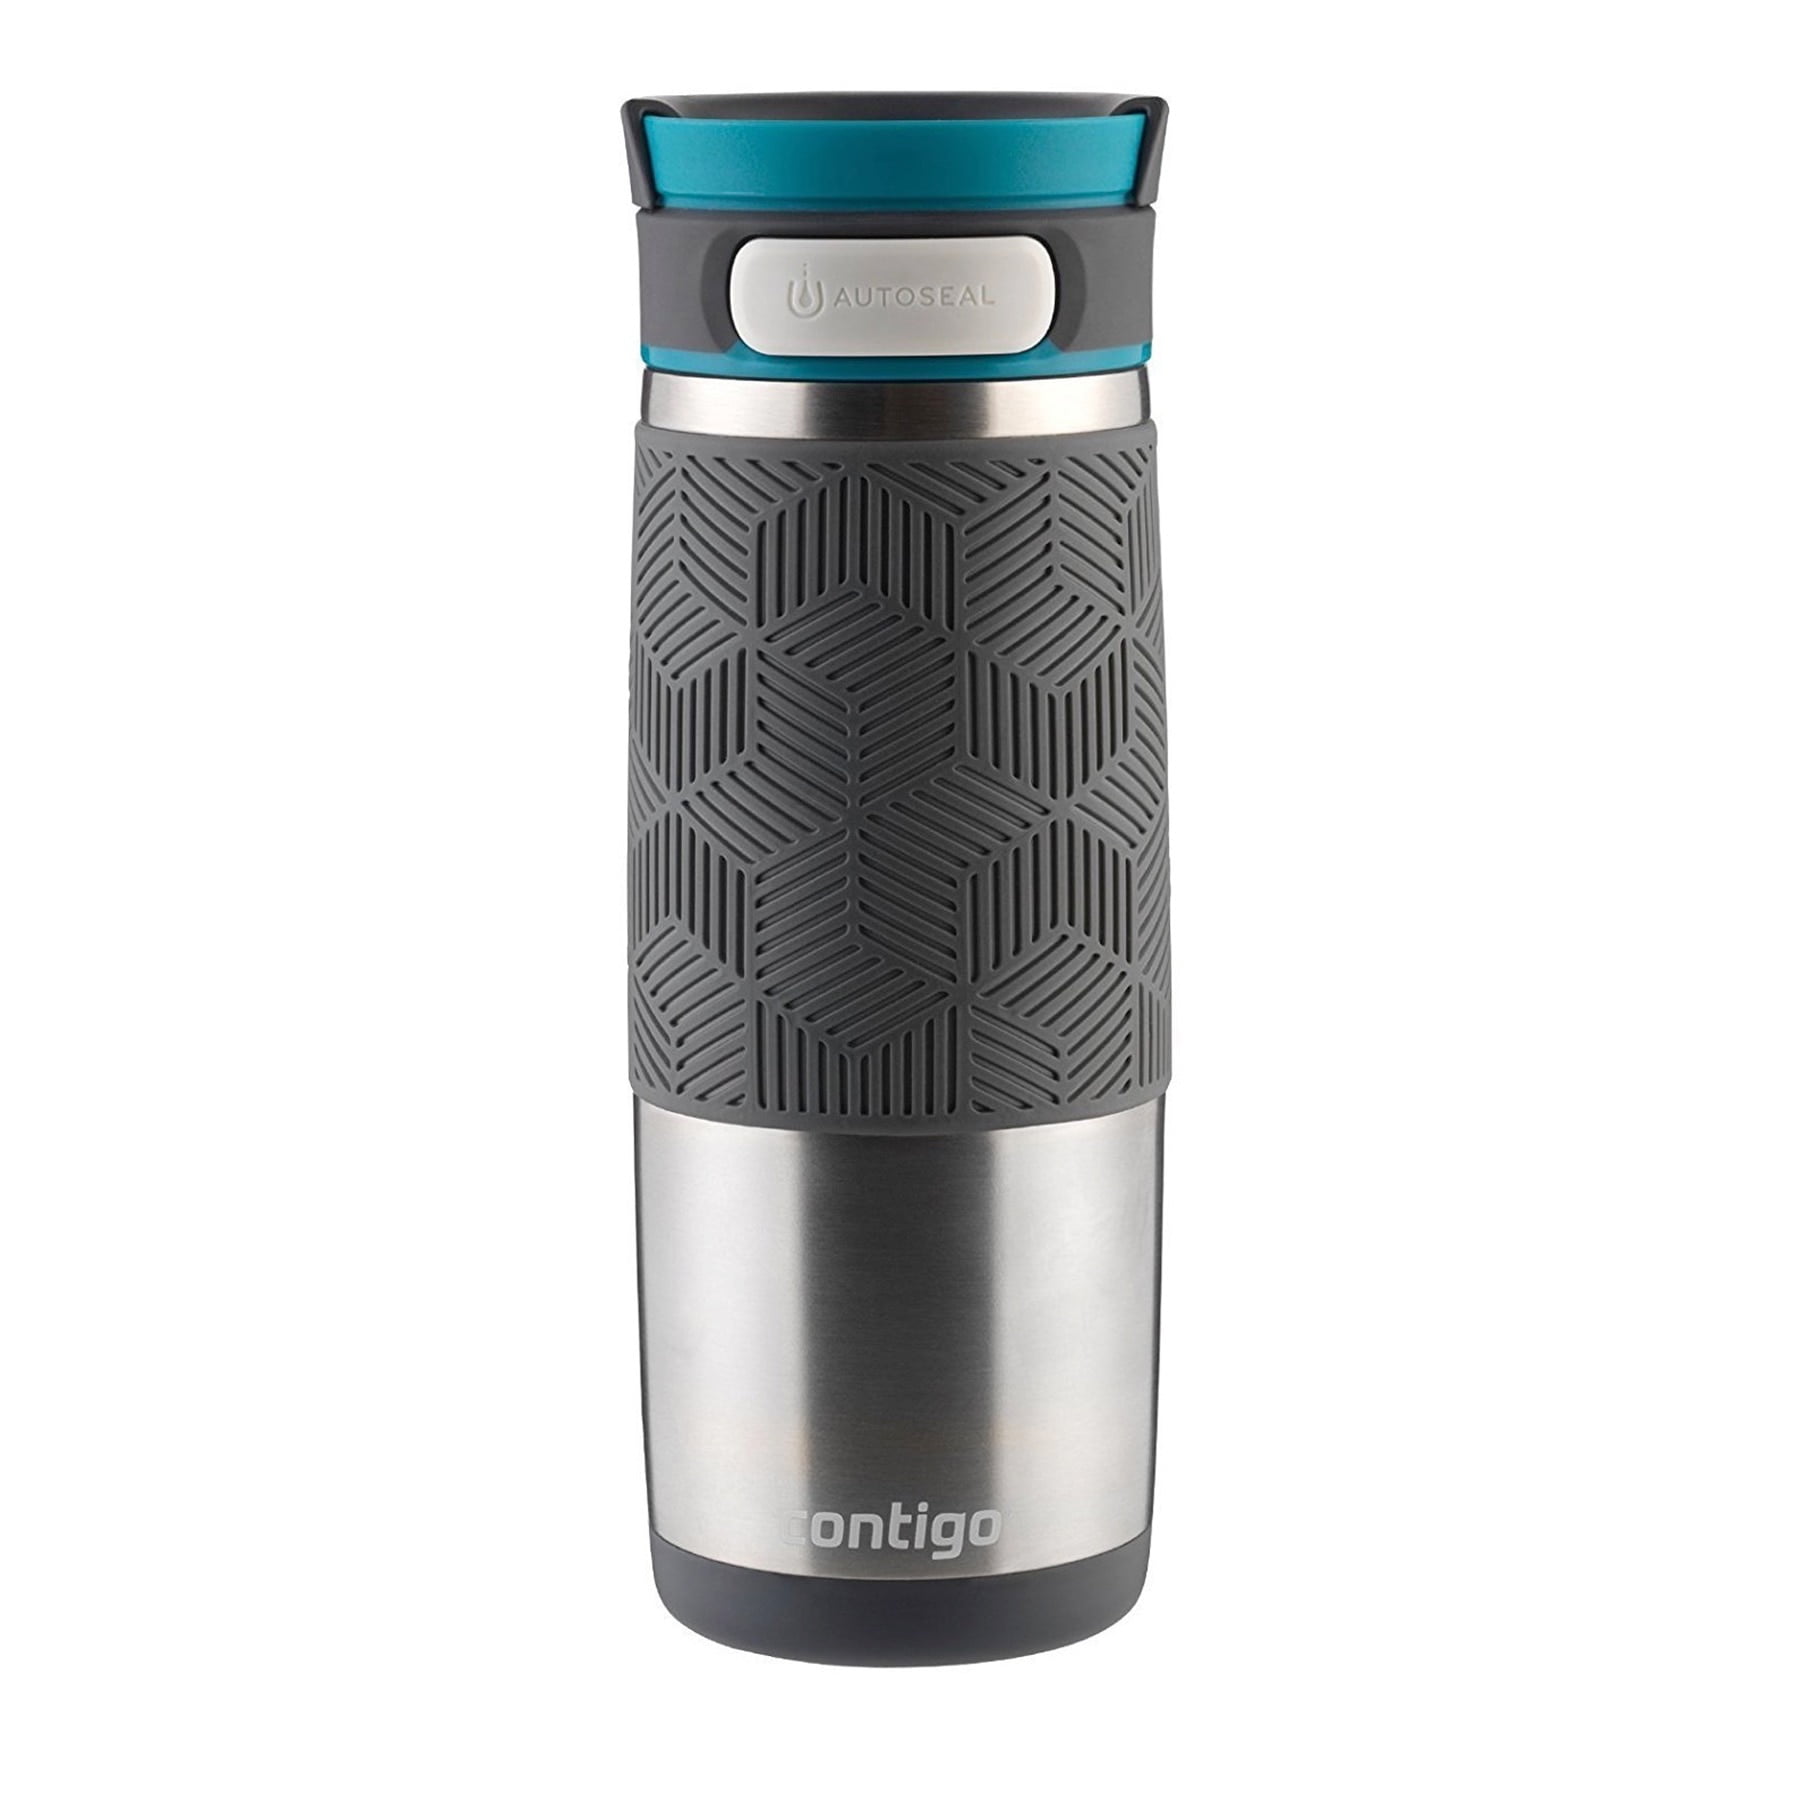 Stainless Steel with Blue Accent Lid Contigo AUTOSEAL Transit Stainless Steel Travel Mug 16 oz